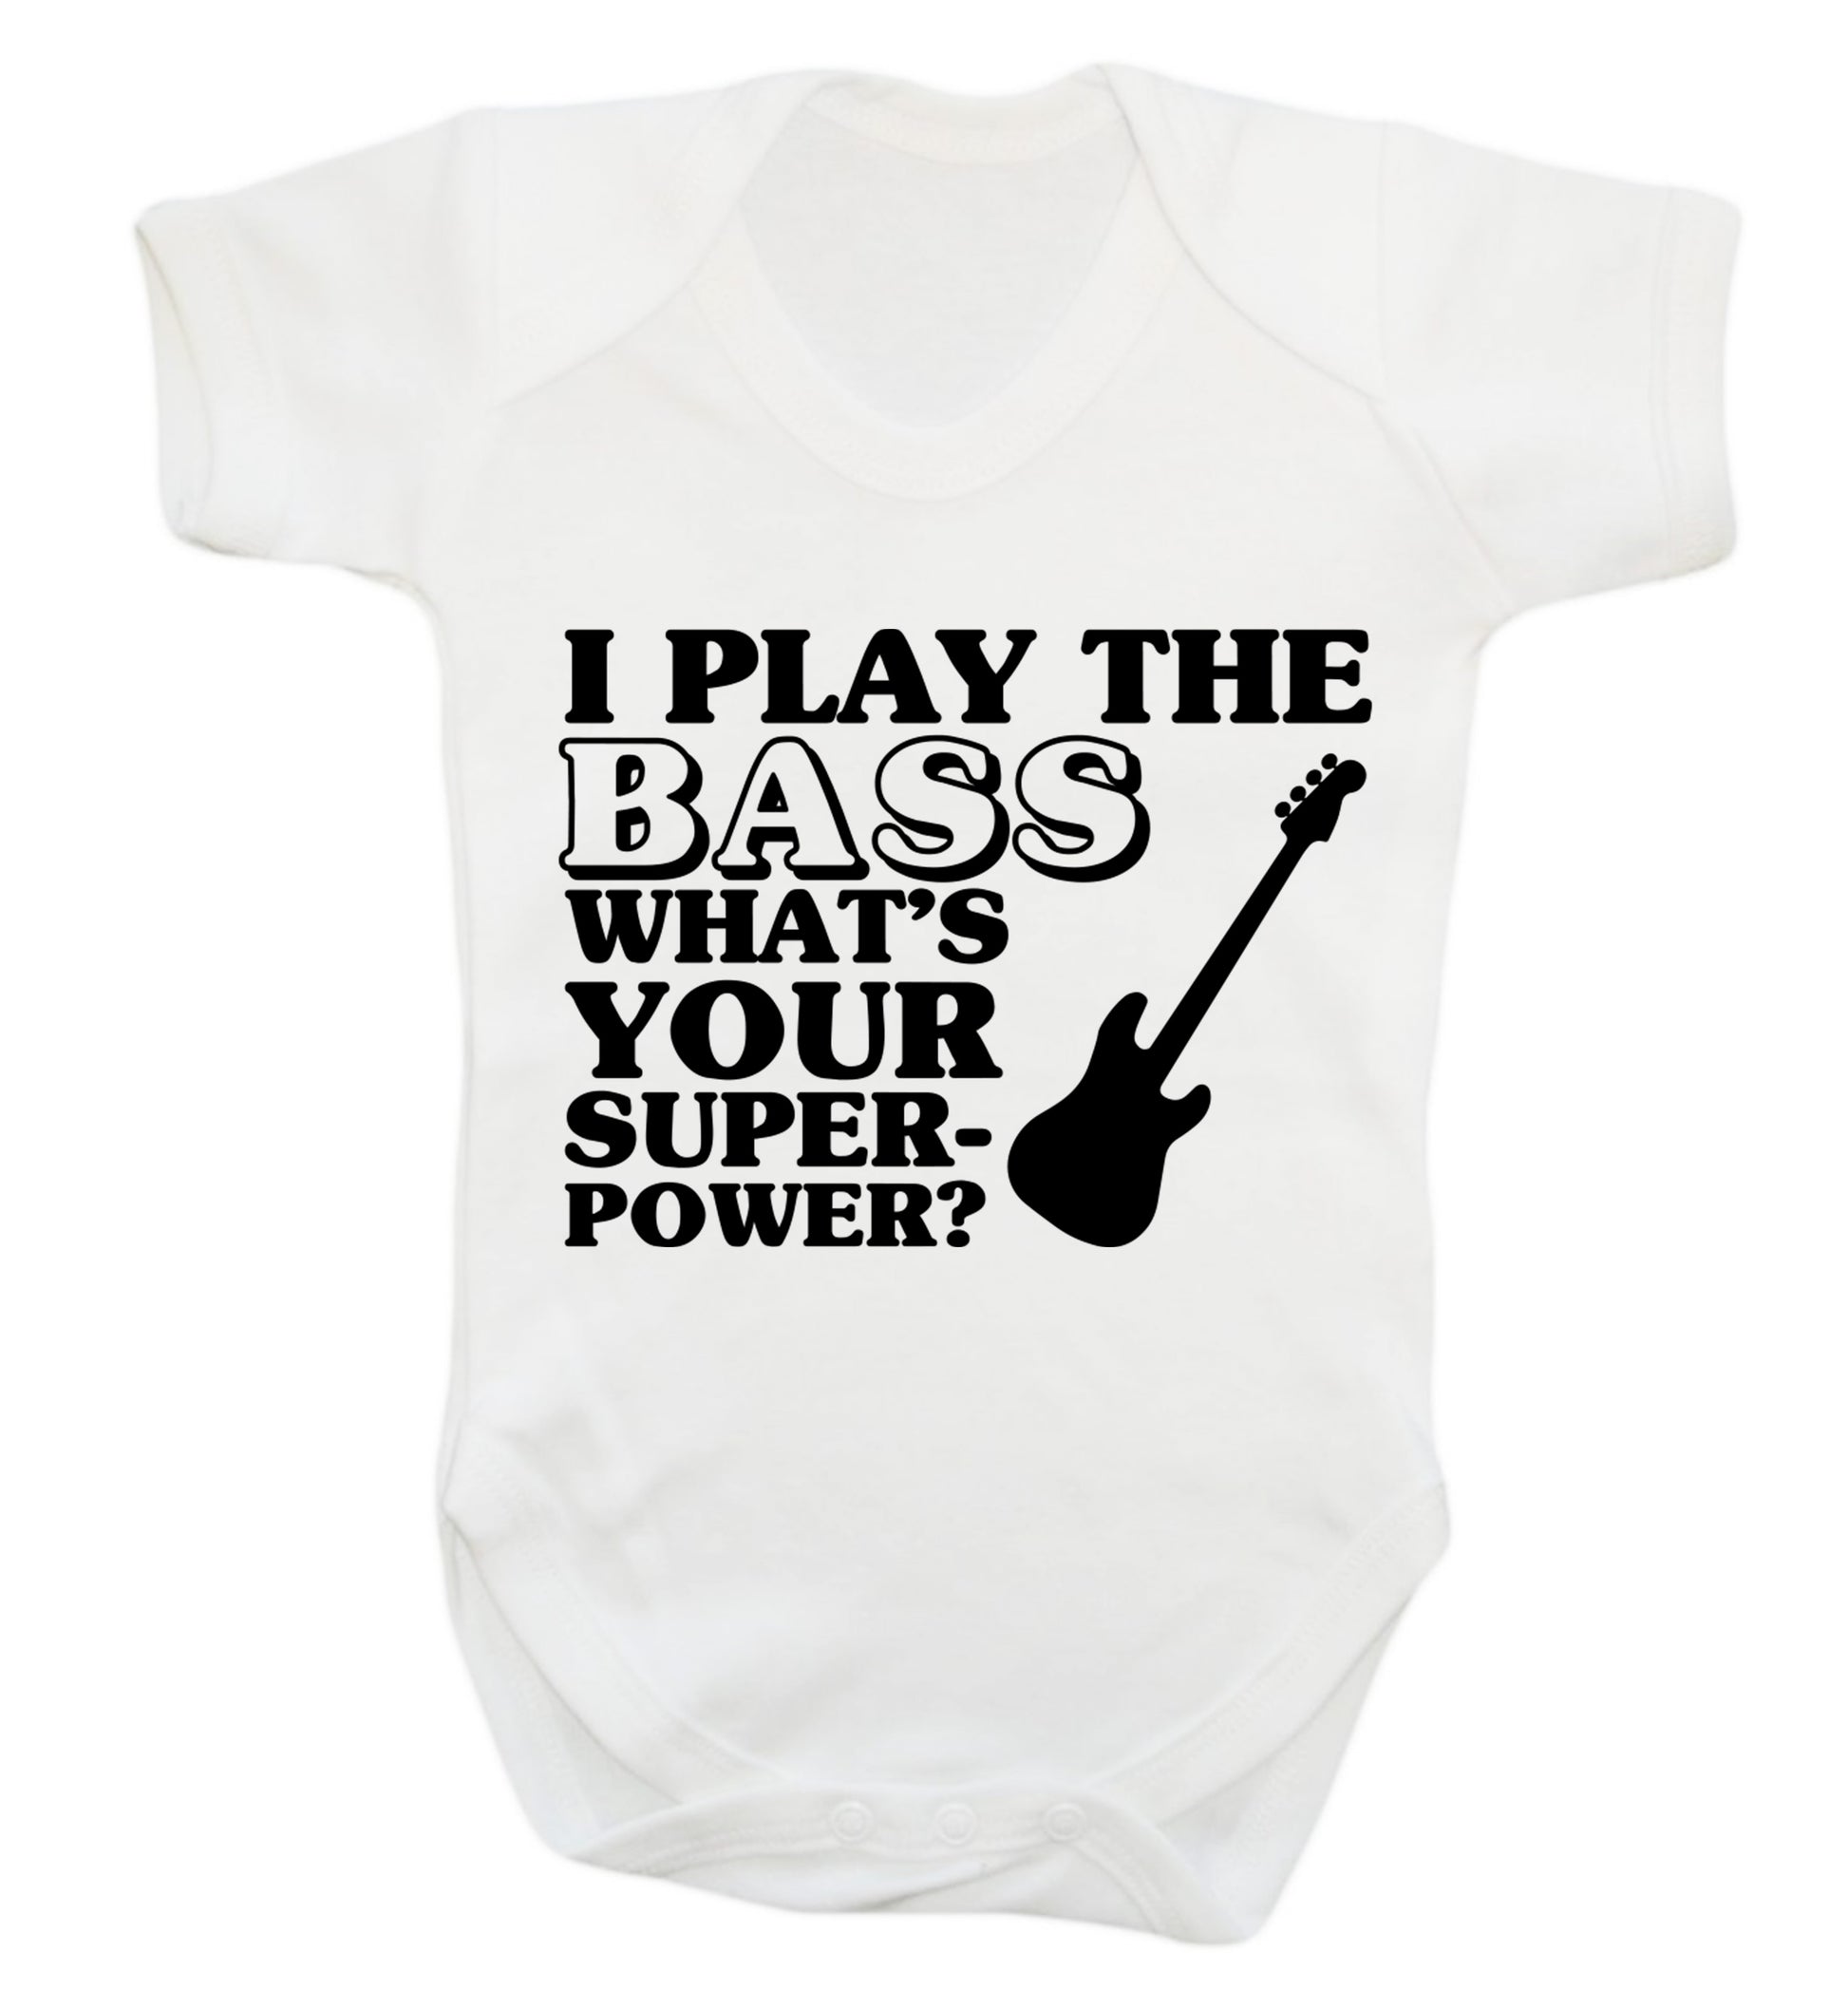 I play the bass what's your superpower? Baby Vest white 18-24 months